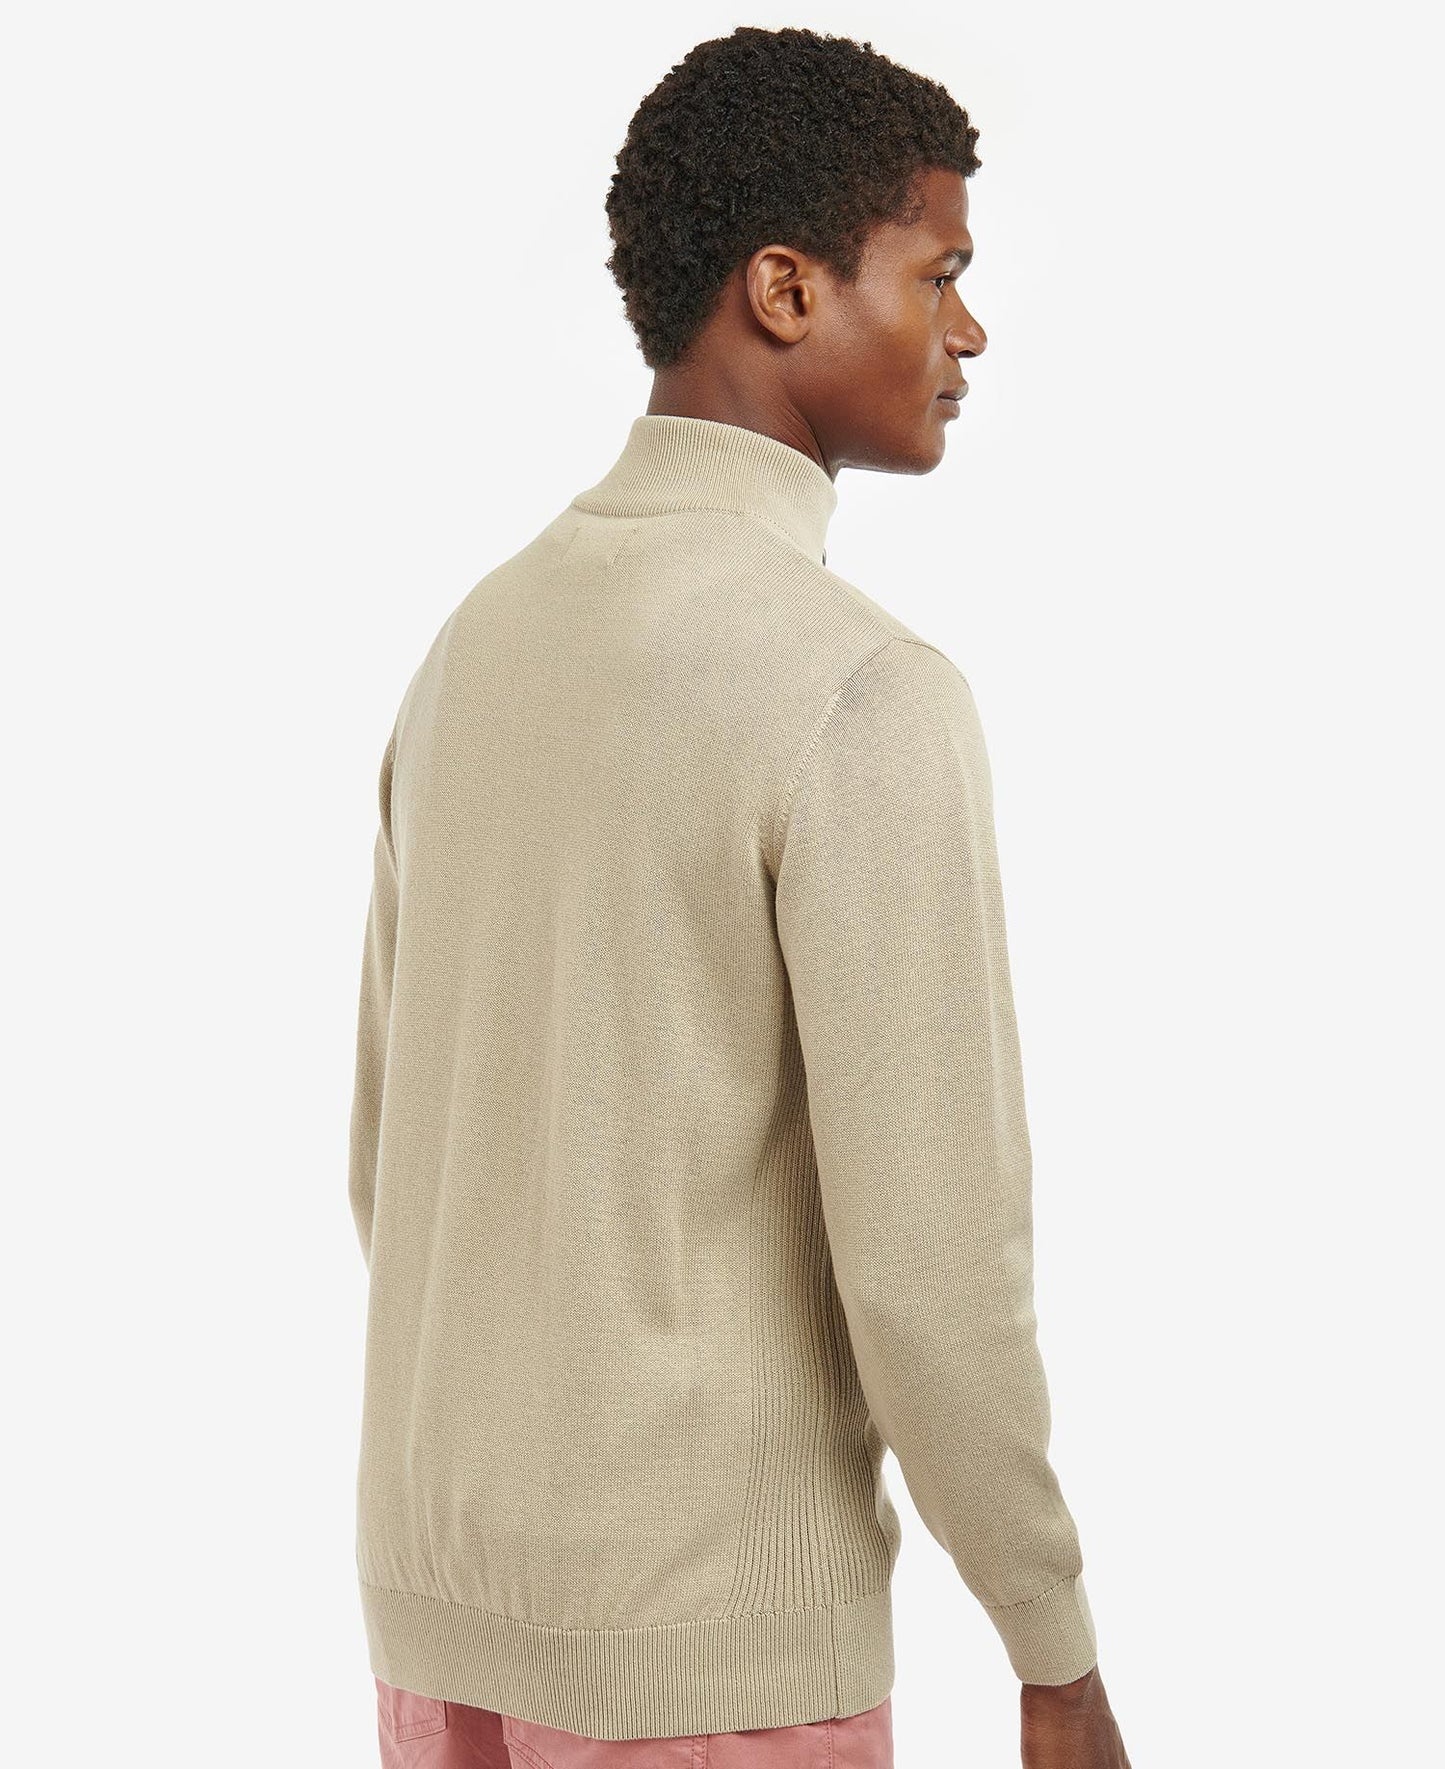 Back view of the Washed Stone color Cotton Half Zip Pullover by Barbour